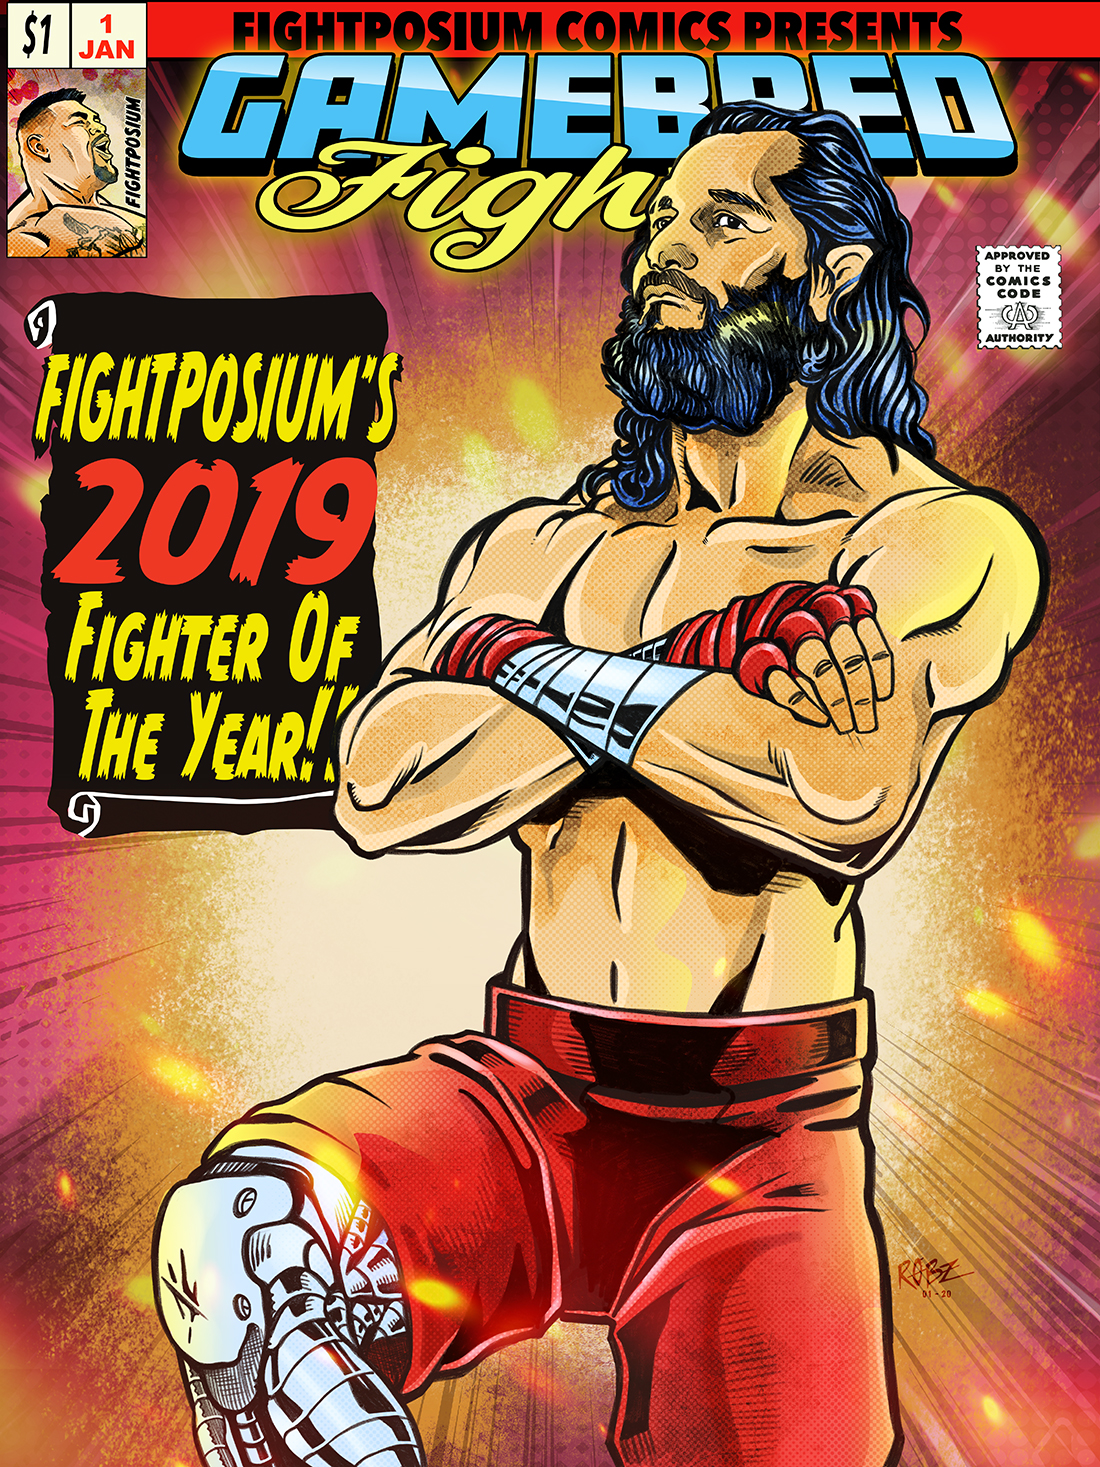 Read more about the article Jorge “Gamebred Fighter” Masvidal – Fightposium’s 2019 MMA Fighter Of The Year!